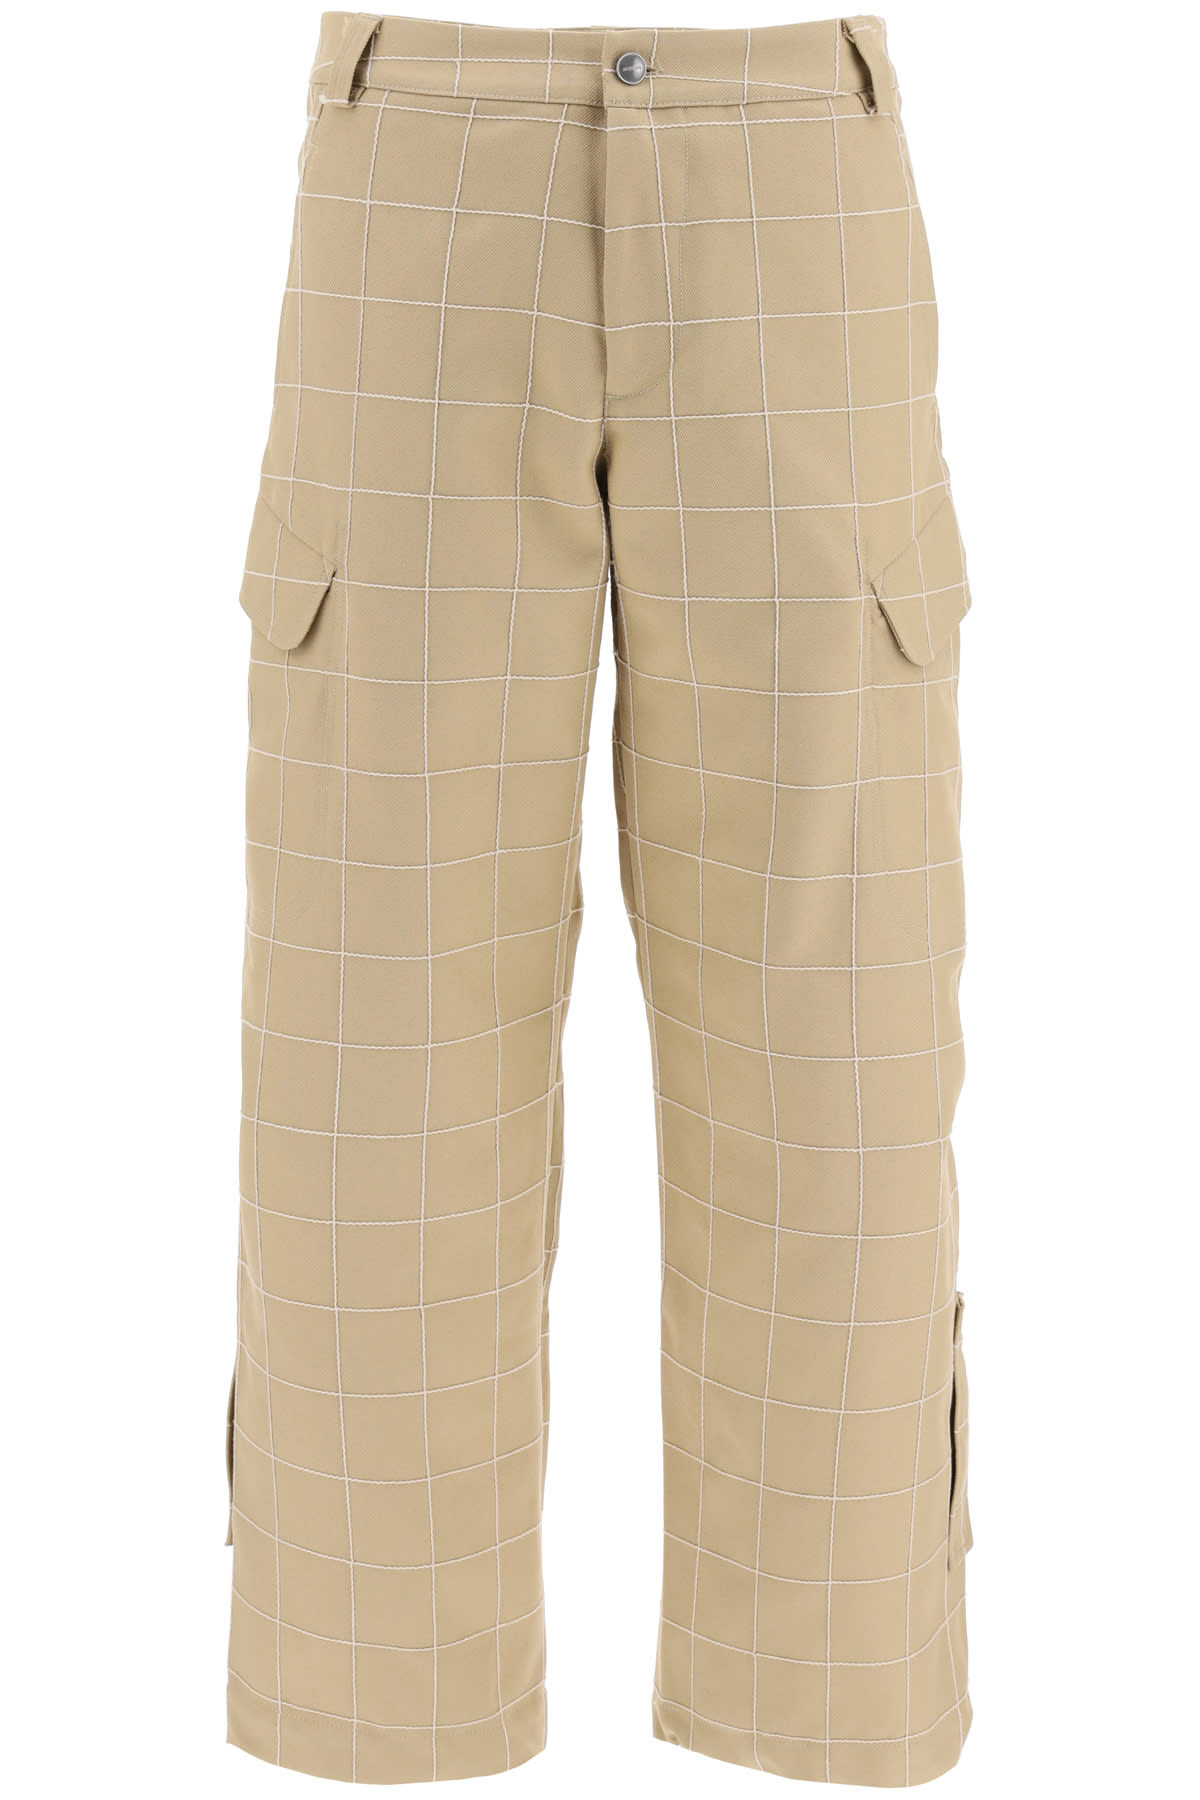 JACQUEMUS CHECKERED CARGO trousers,206PA07 206 104814 BECHE